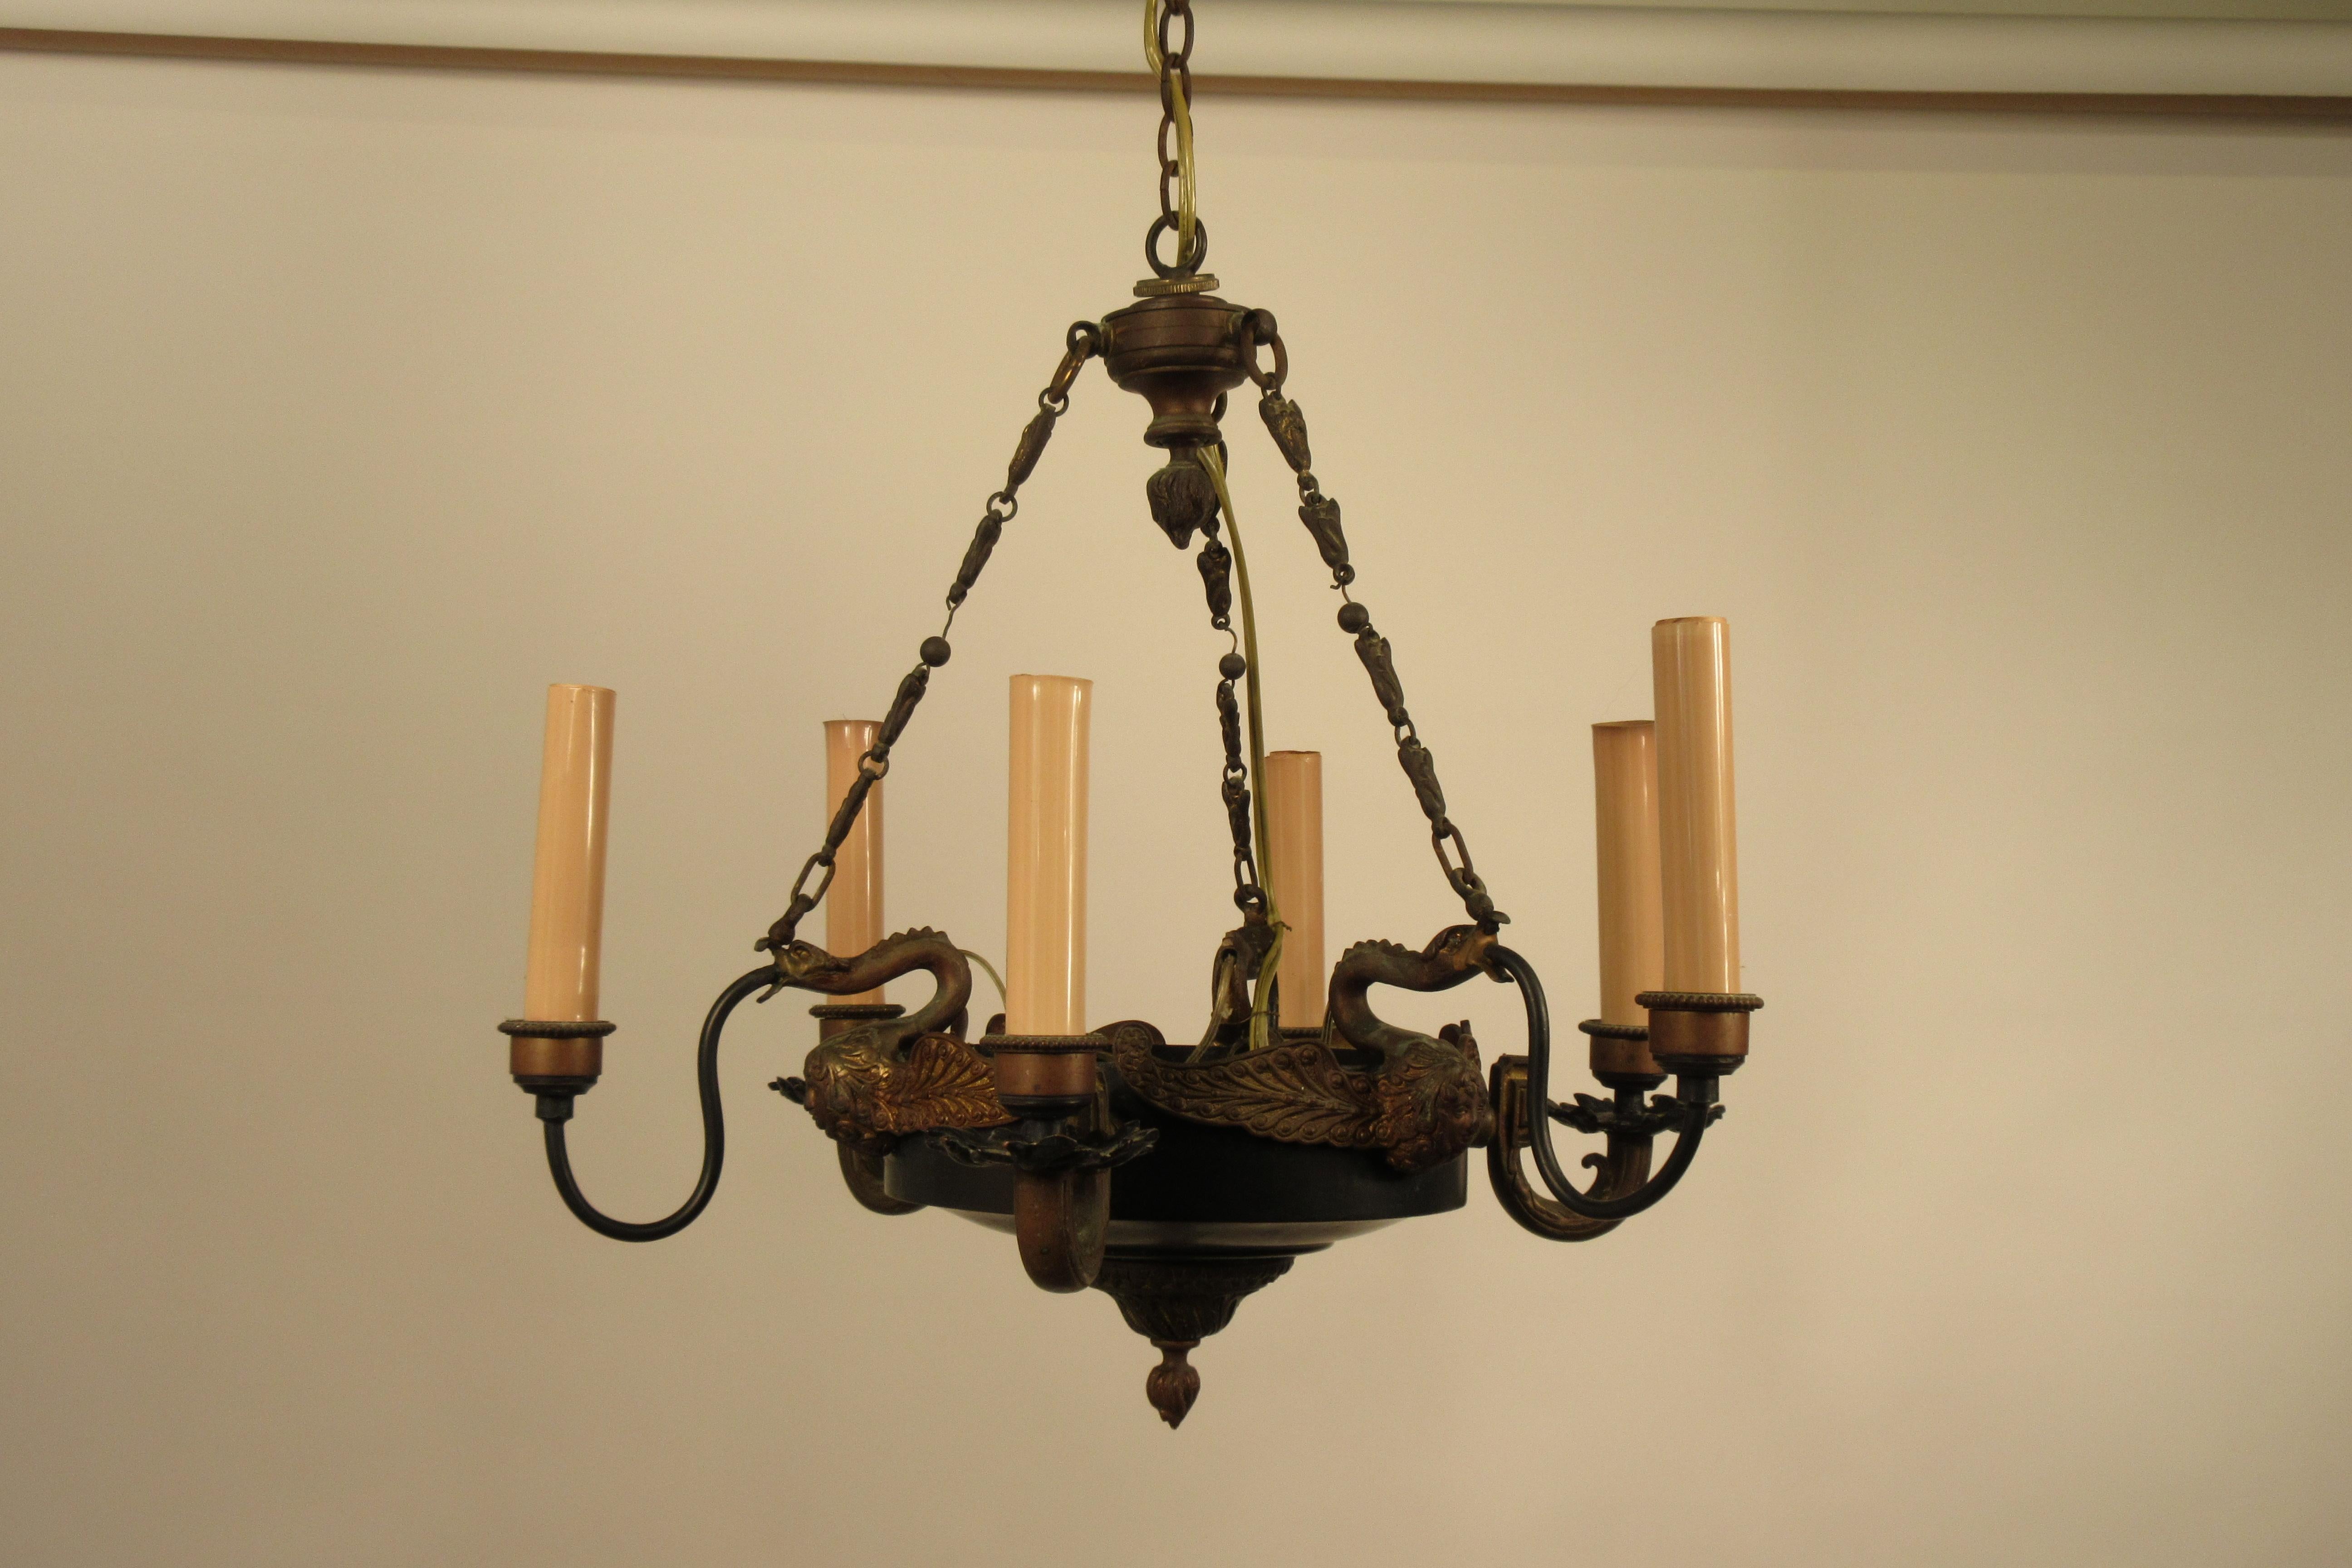 1940s French neoclassical small chandelier adorned with swan heads and faces. Brass and tole.